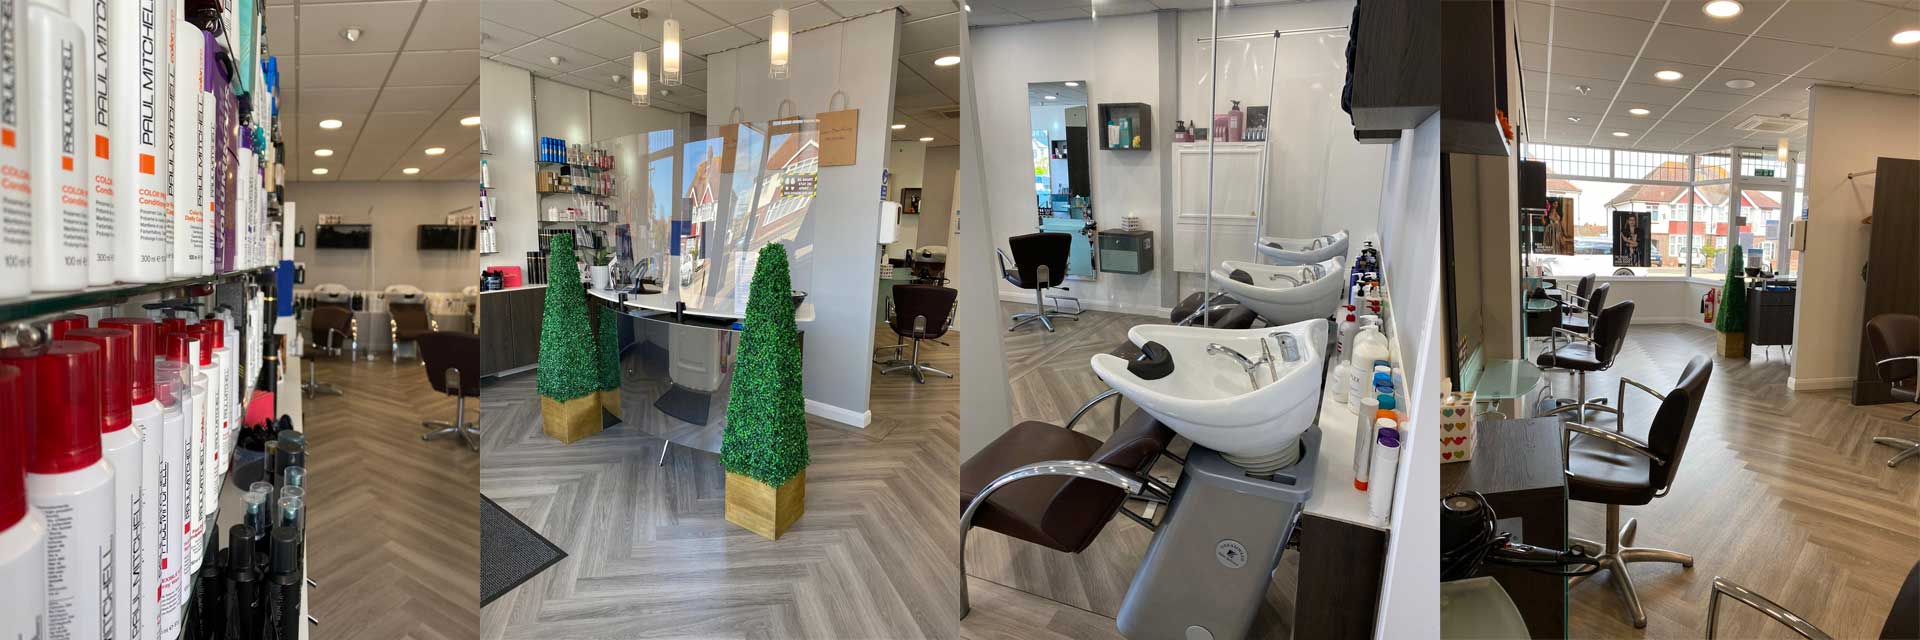 Images of the interior at Keith Graham Hairdressing